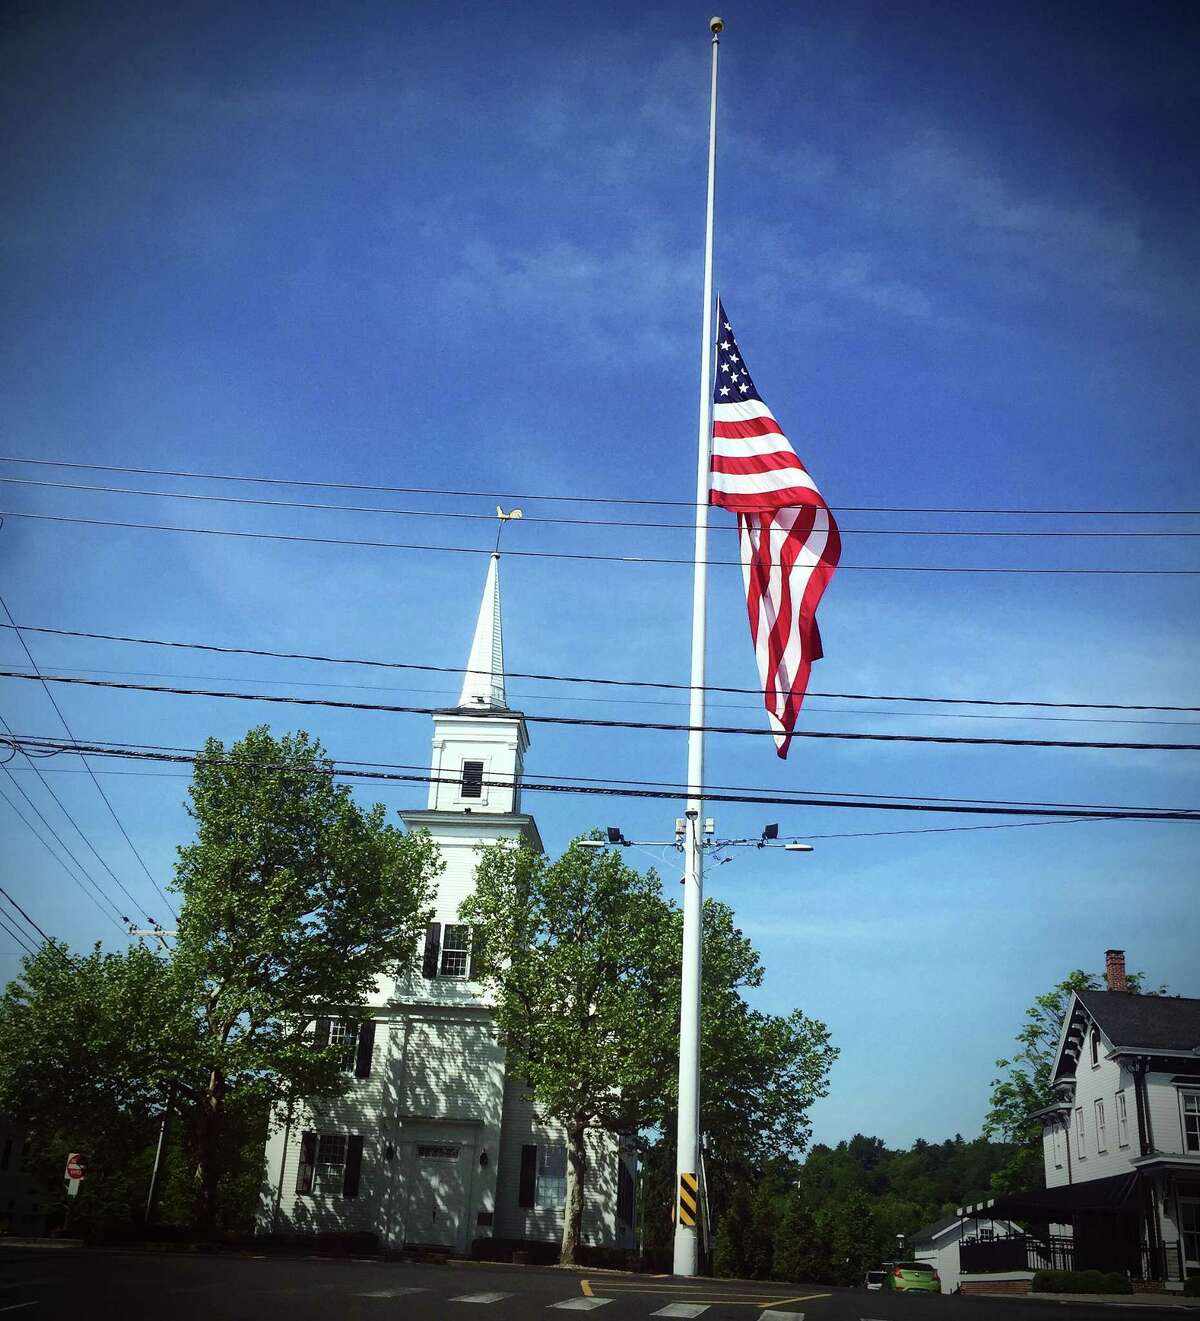 The U.S. flag on Main Street in Newtown, Conn., was lowered in honor of the victims of the shooting at a school in Uvalde, Texas, on May 24, 2022.